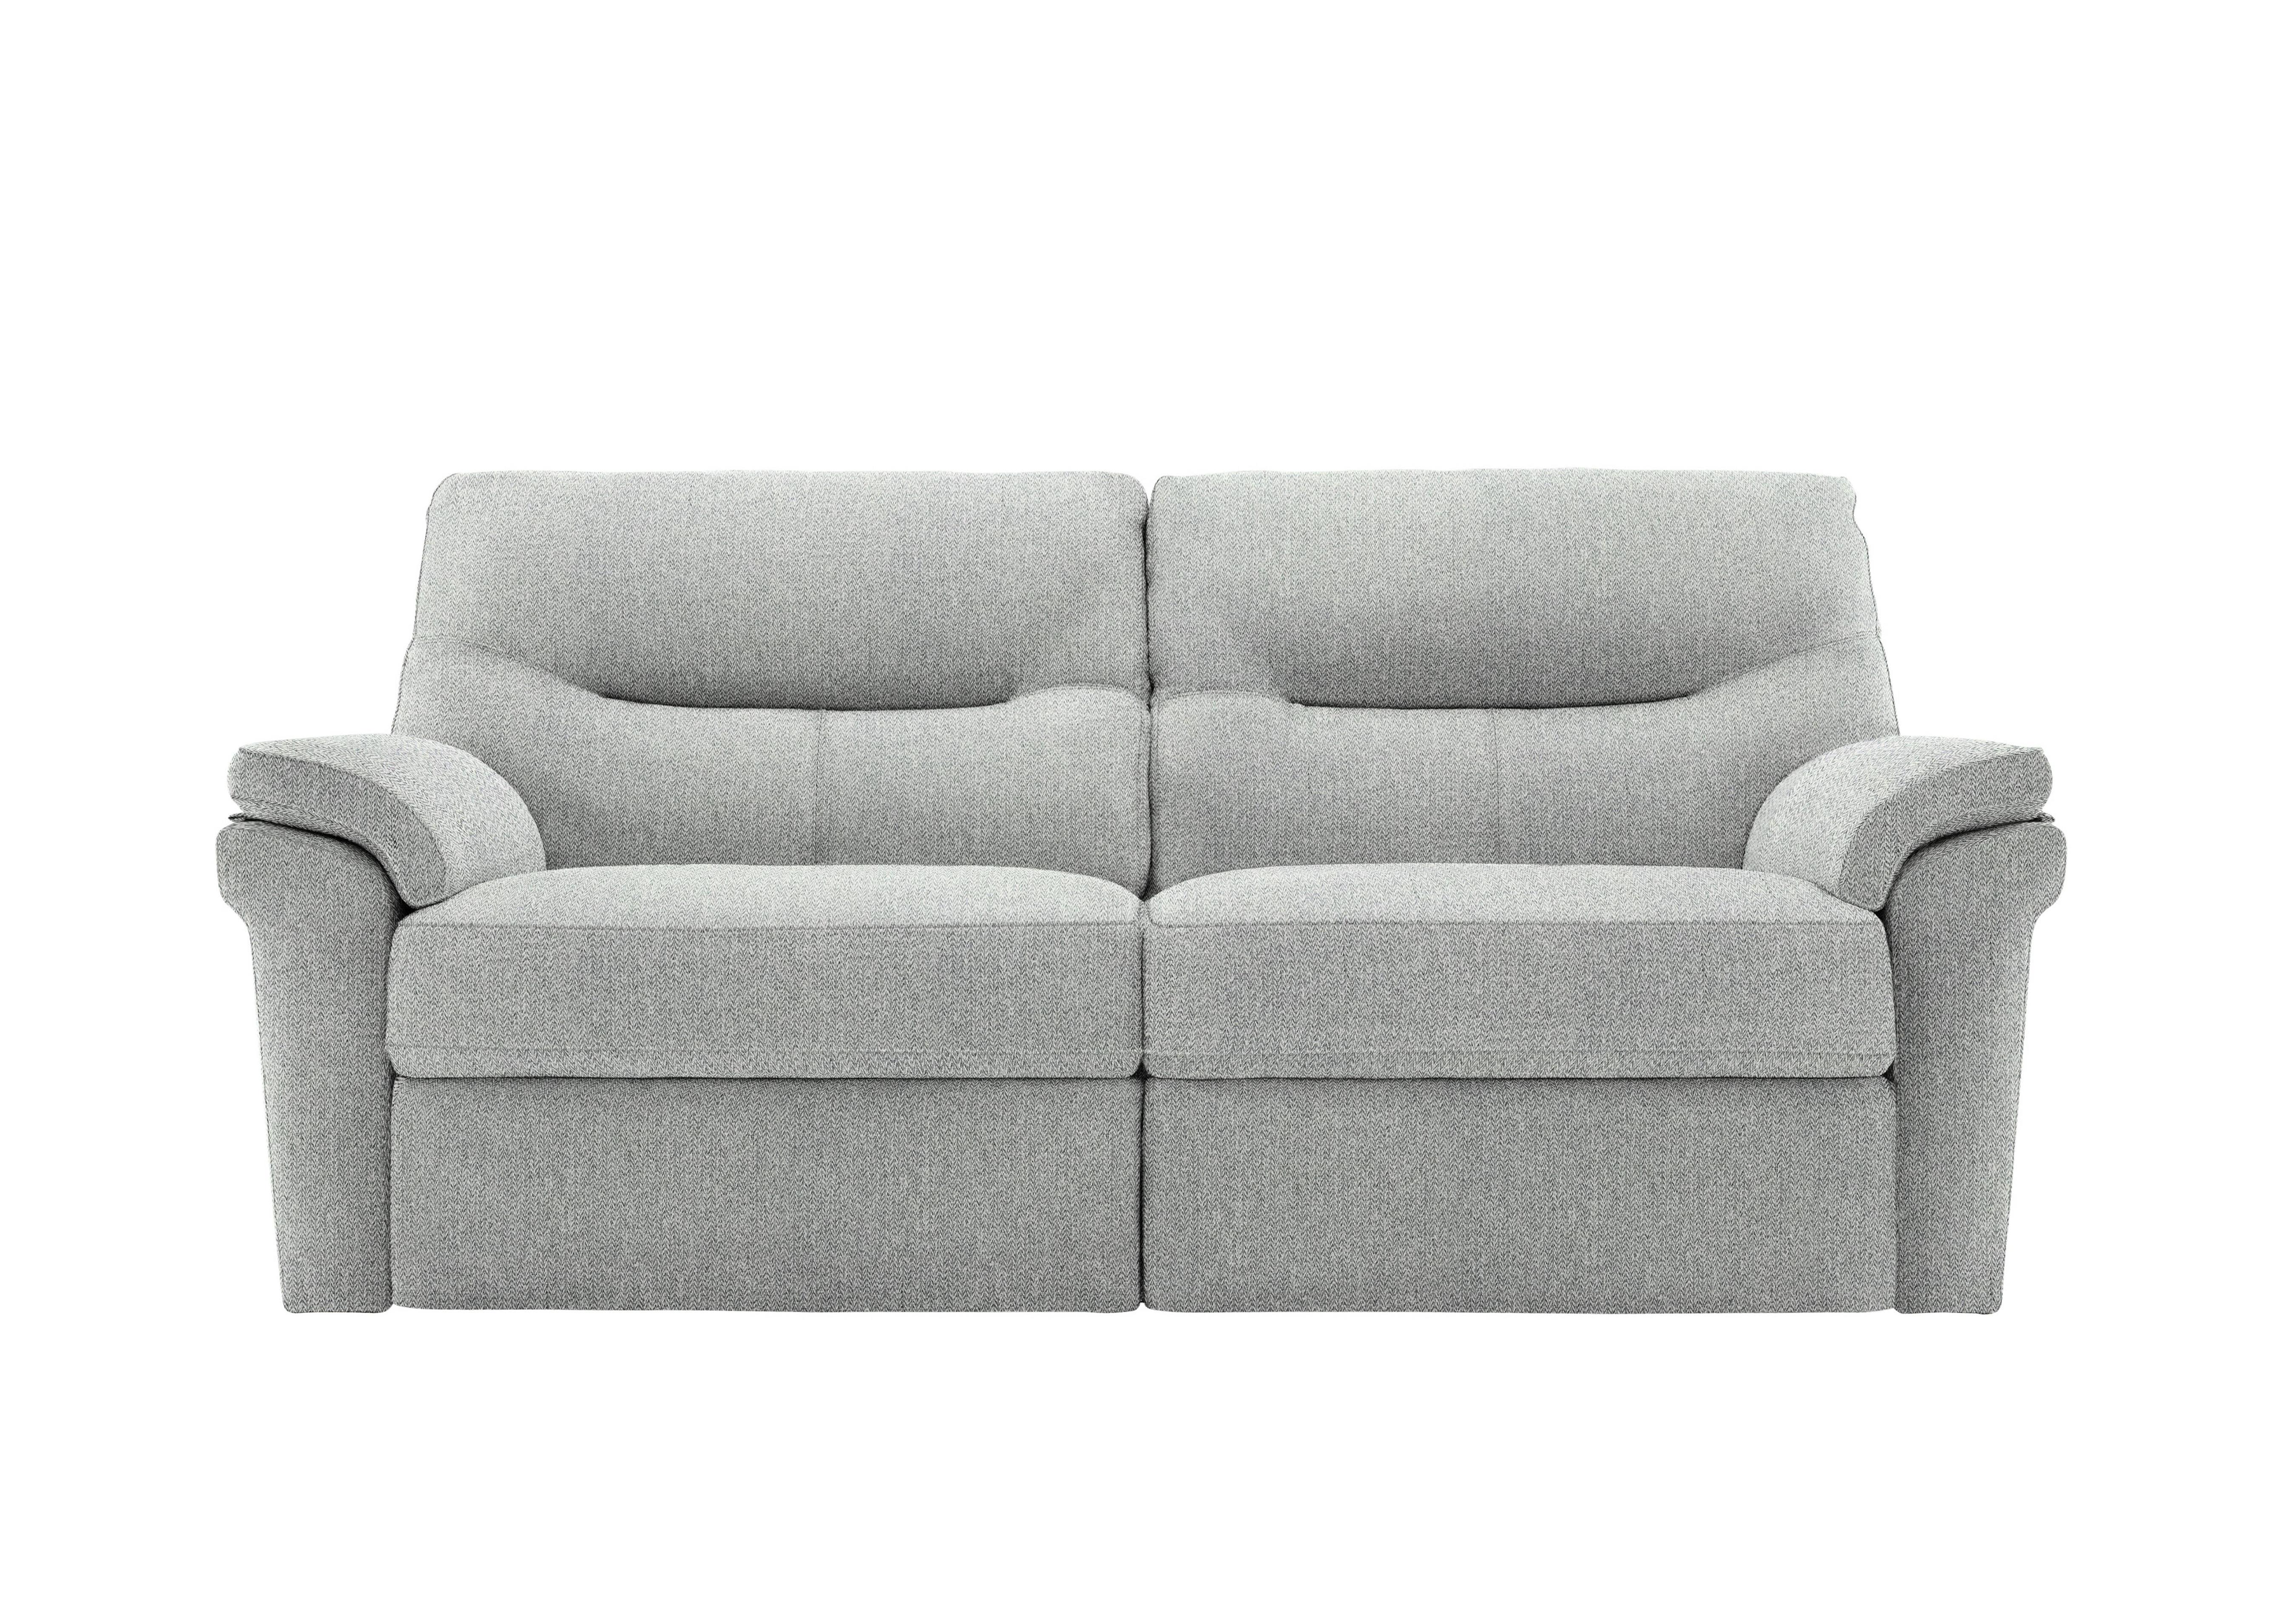 Seattle 3 Seater Fabric Sofa in A011 Swift Cygnet on Furniture Village